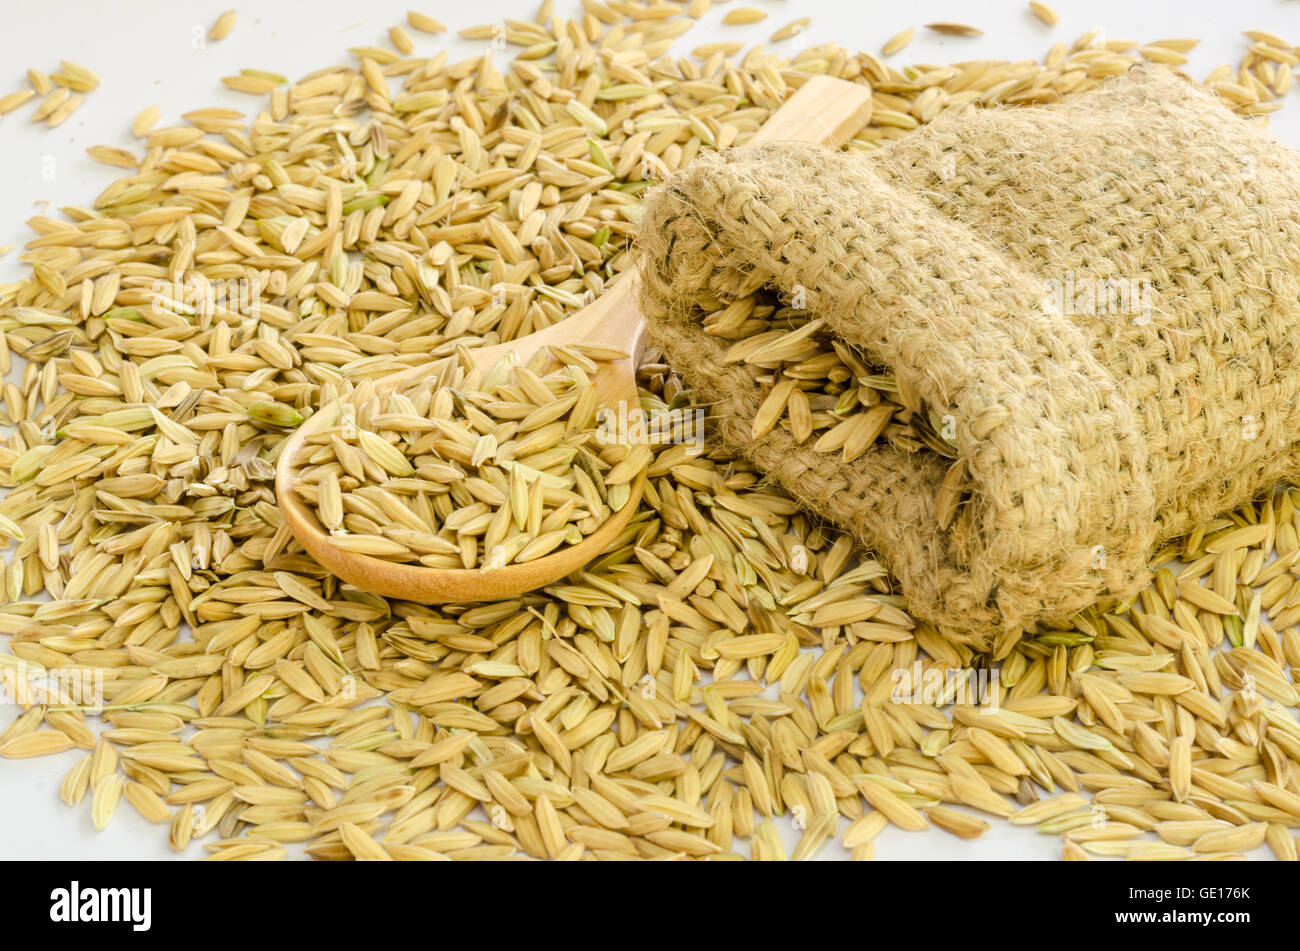 paddy rice seed in a  Burlap sack. Stock Photo